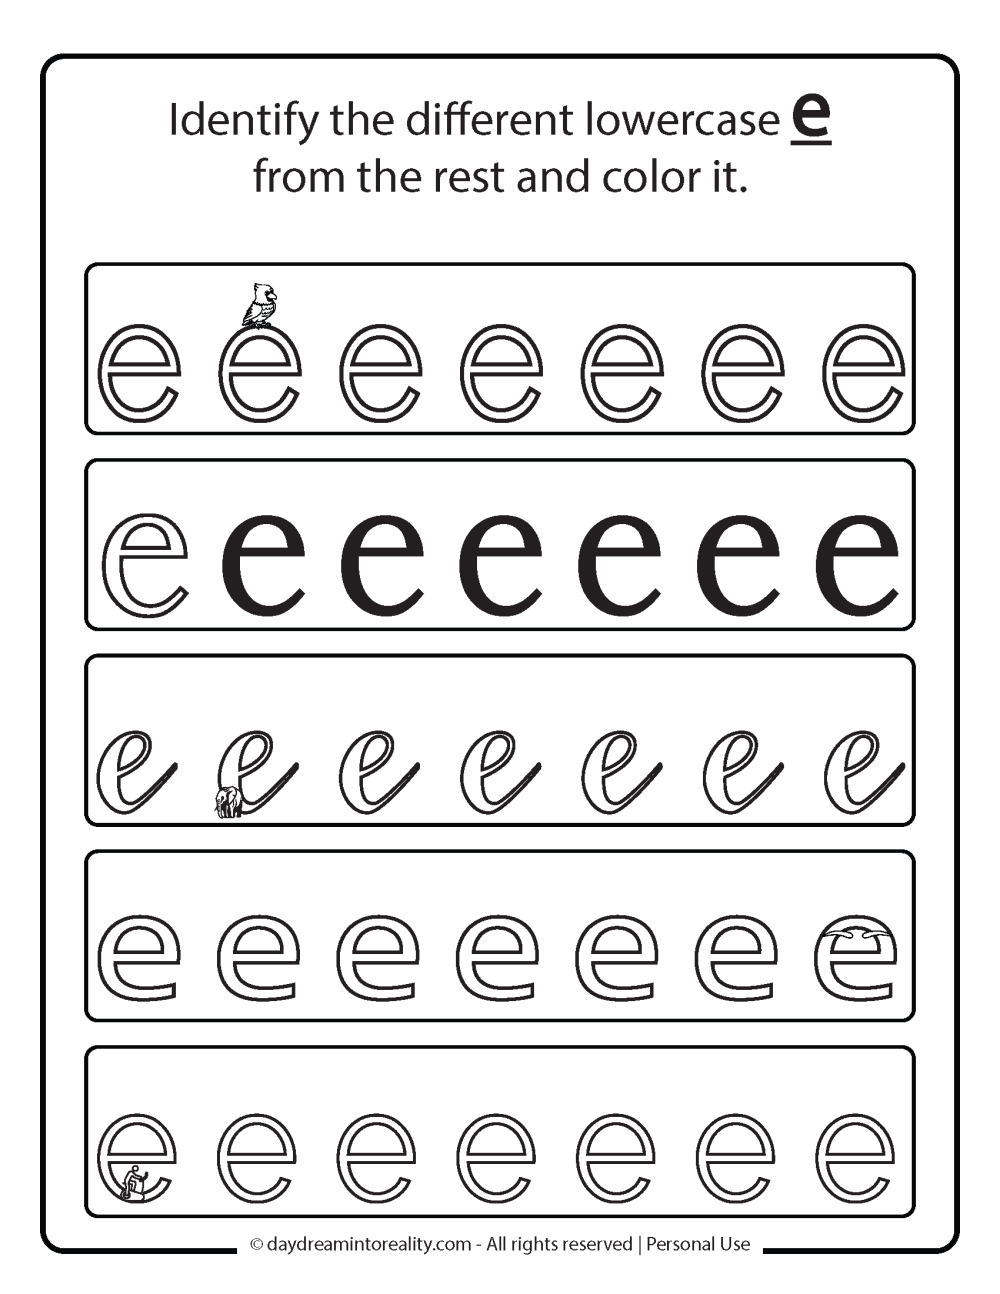 Letter E worksheet free printables. Identify the different lowercase e.